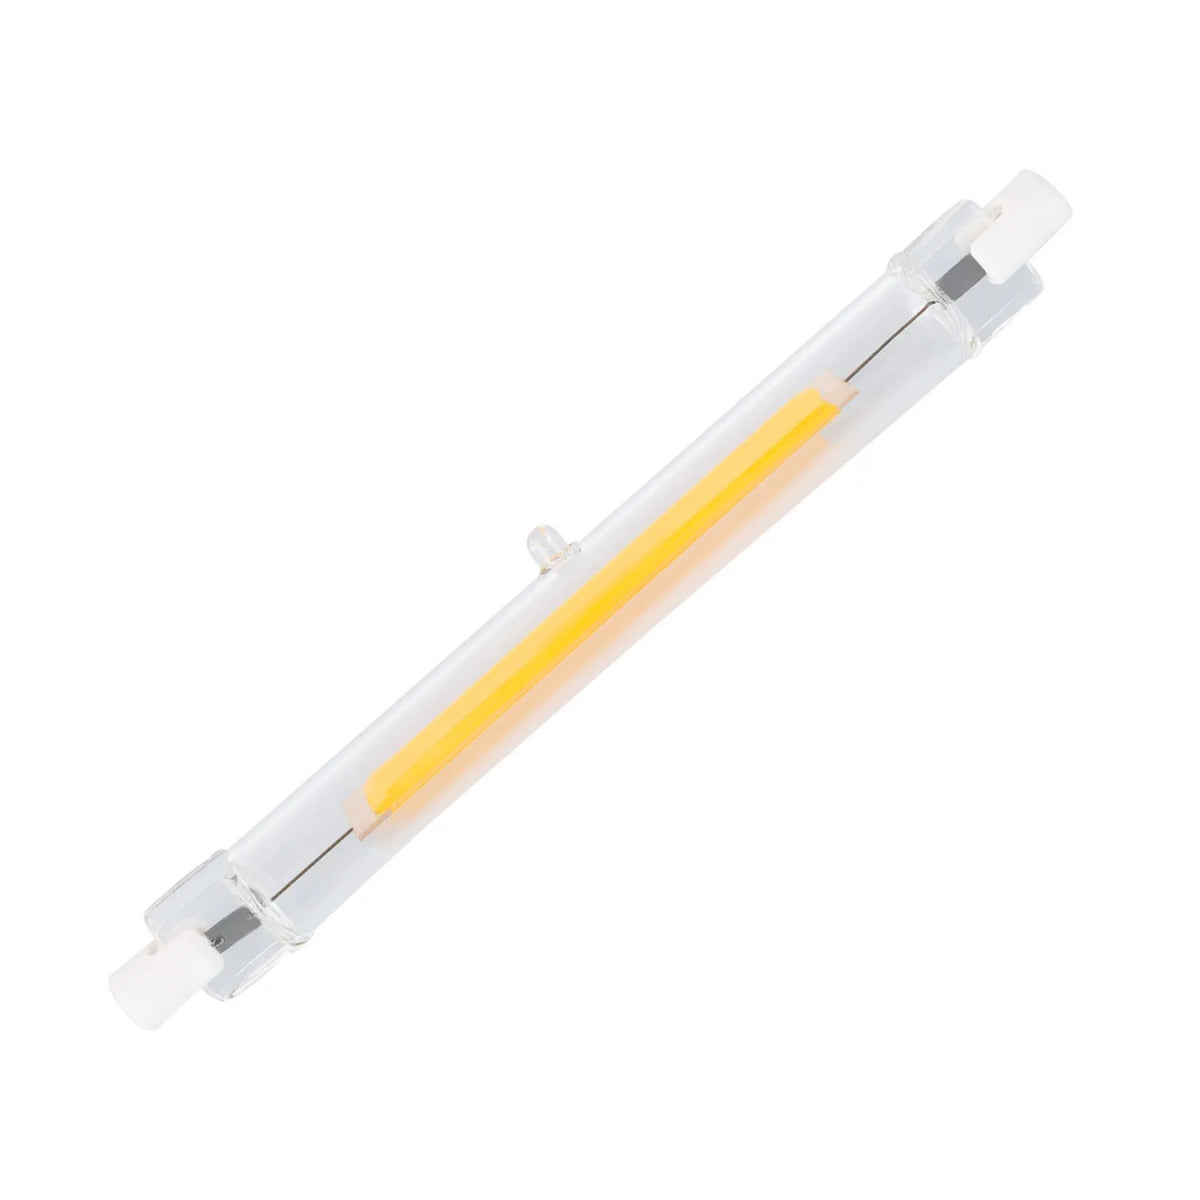 20W R7s 3000K Dimmable LED Lamp (Slim)